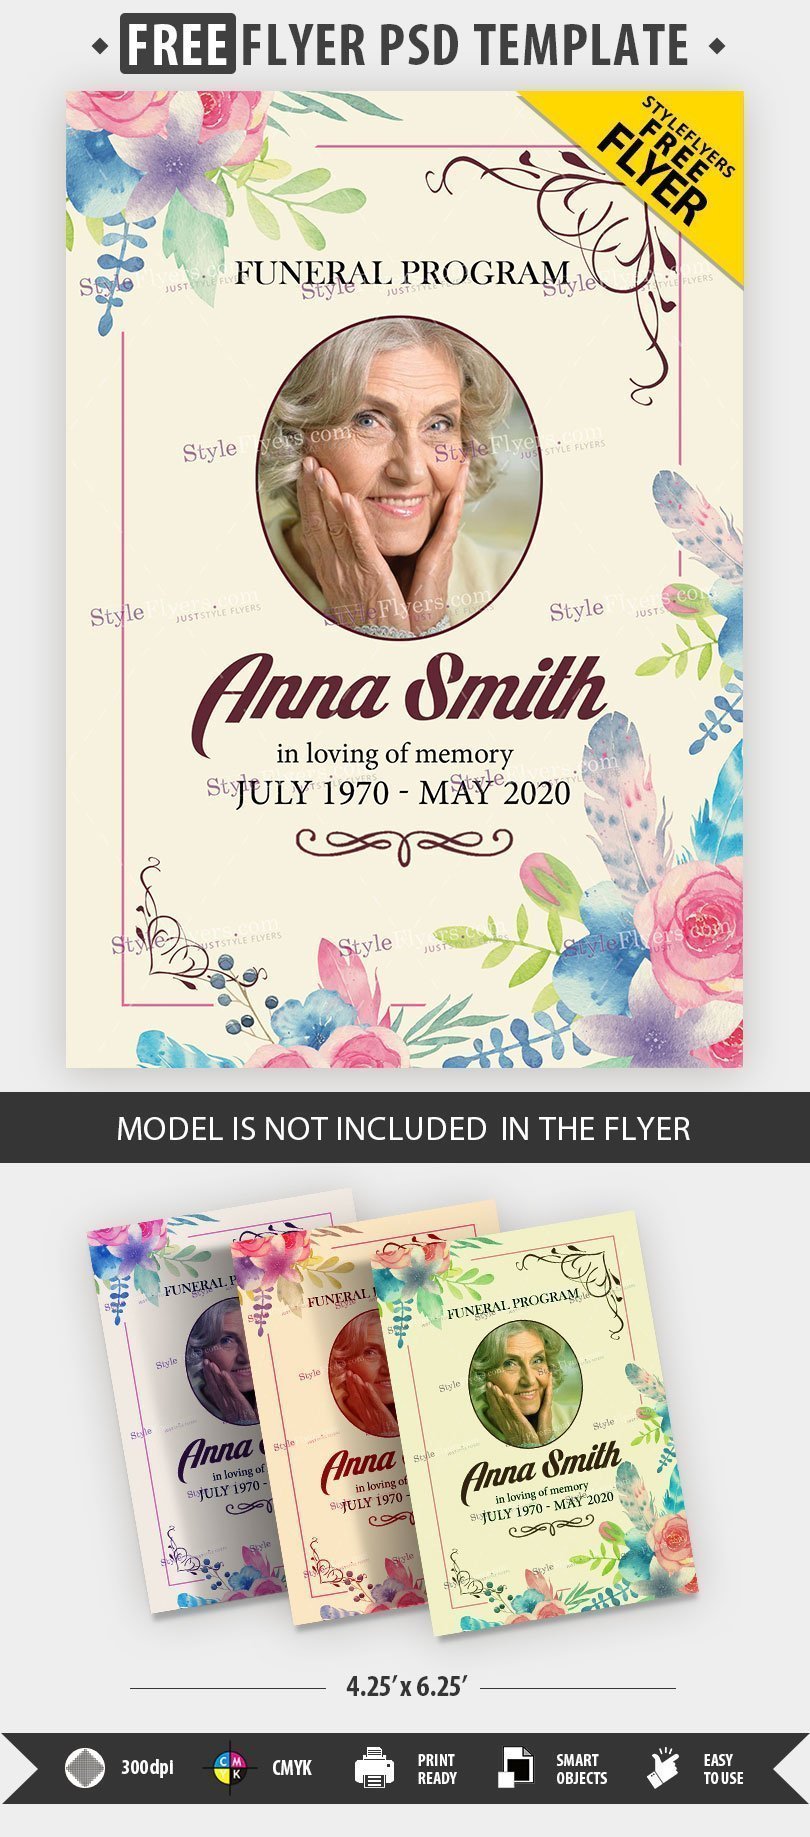 Funeral Program FREE PSD Flyer Template Free Download ...